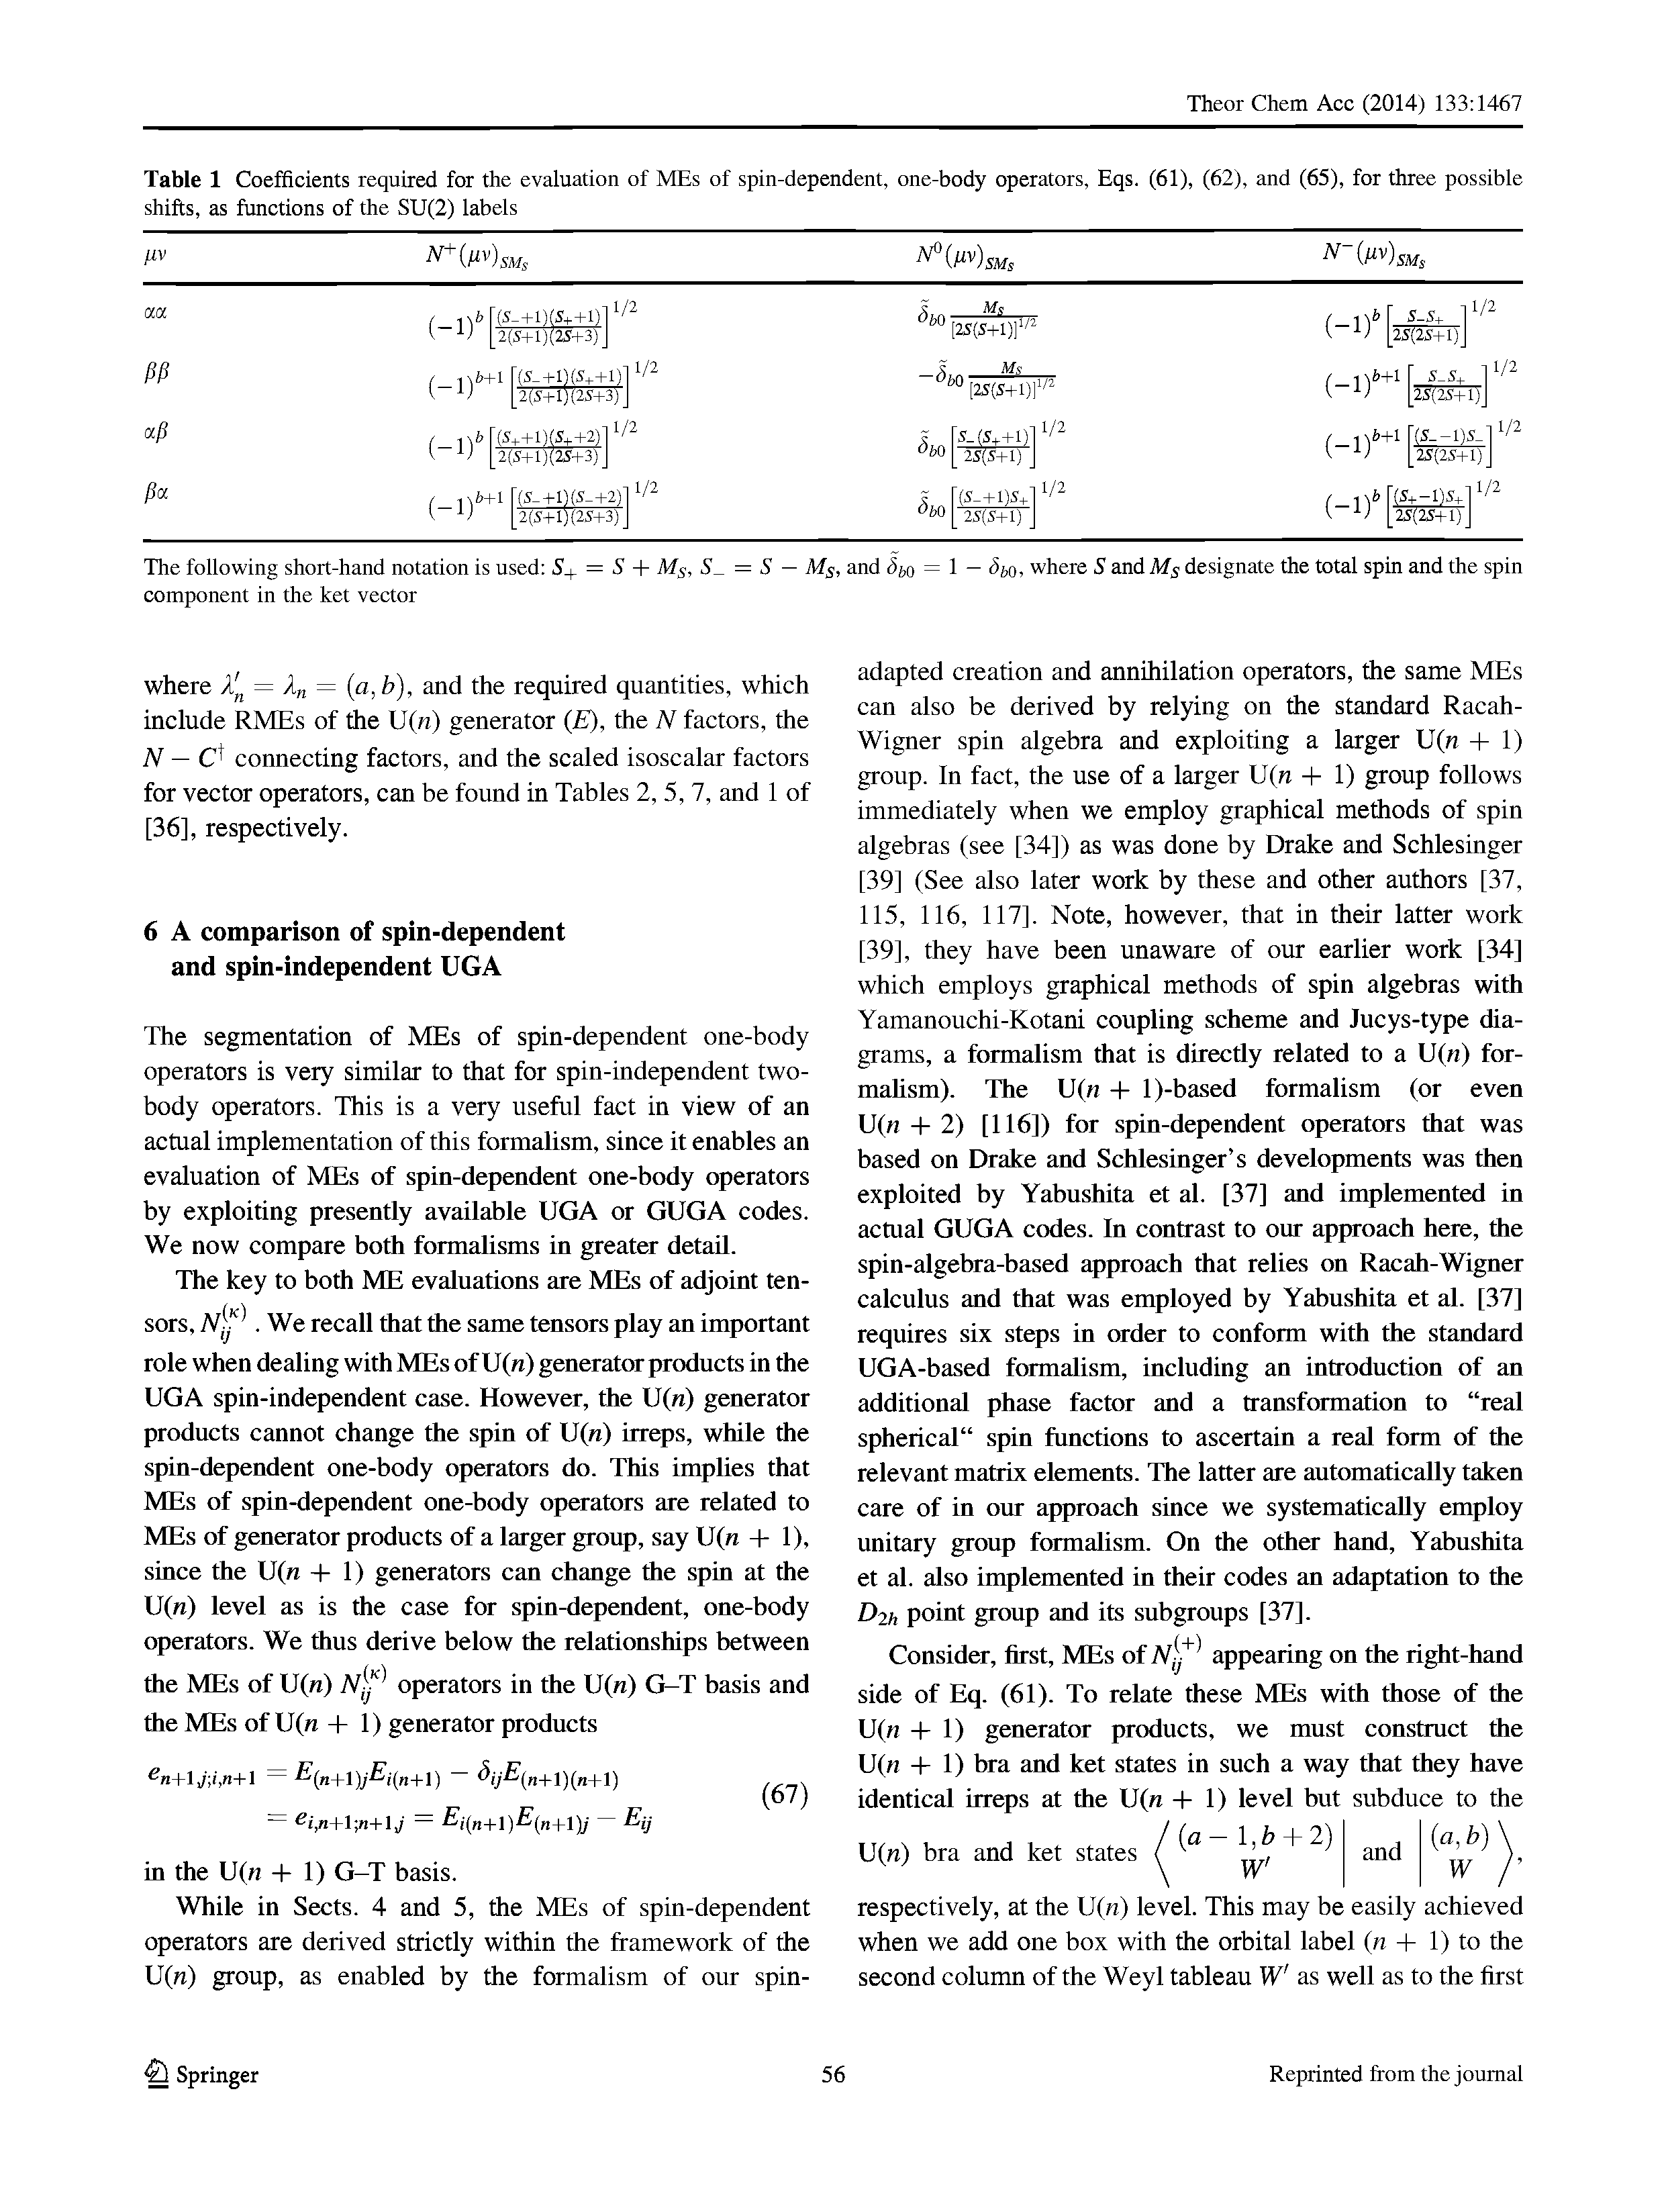 Table 1 Coefficients required for the evaluation of MEs of spin-dependent, one-body operators, Eqs. (61), (62), and (65), for three possible shifts, as functions of the SU(2) labels...